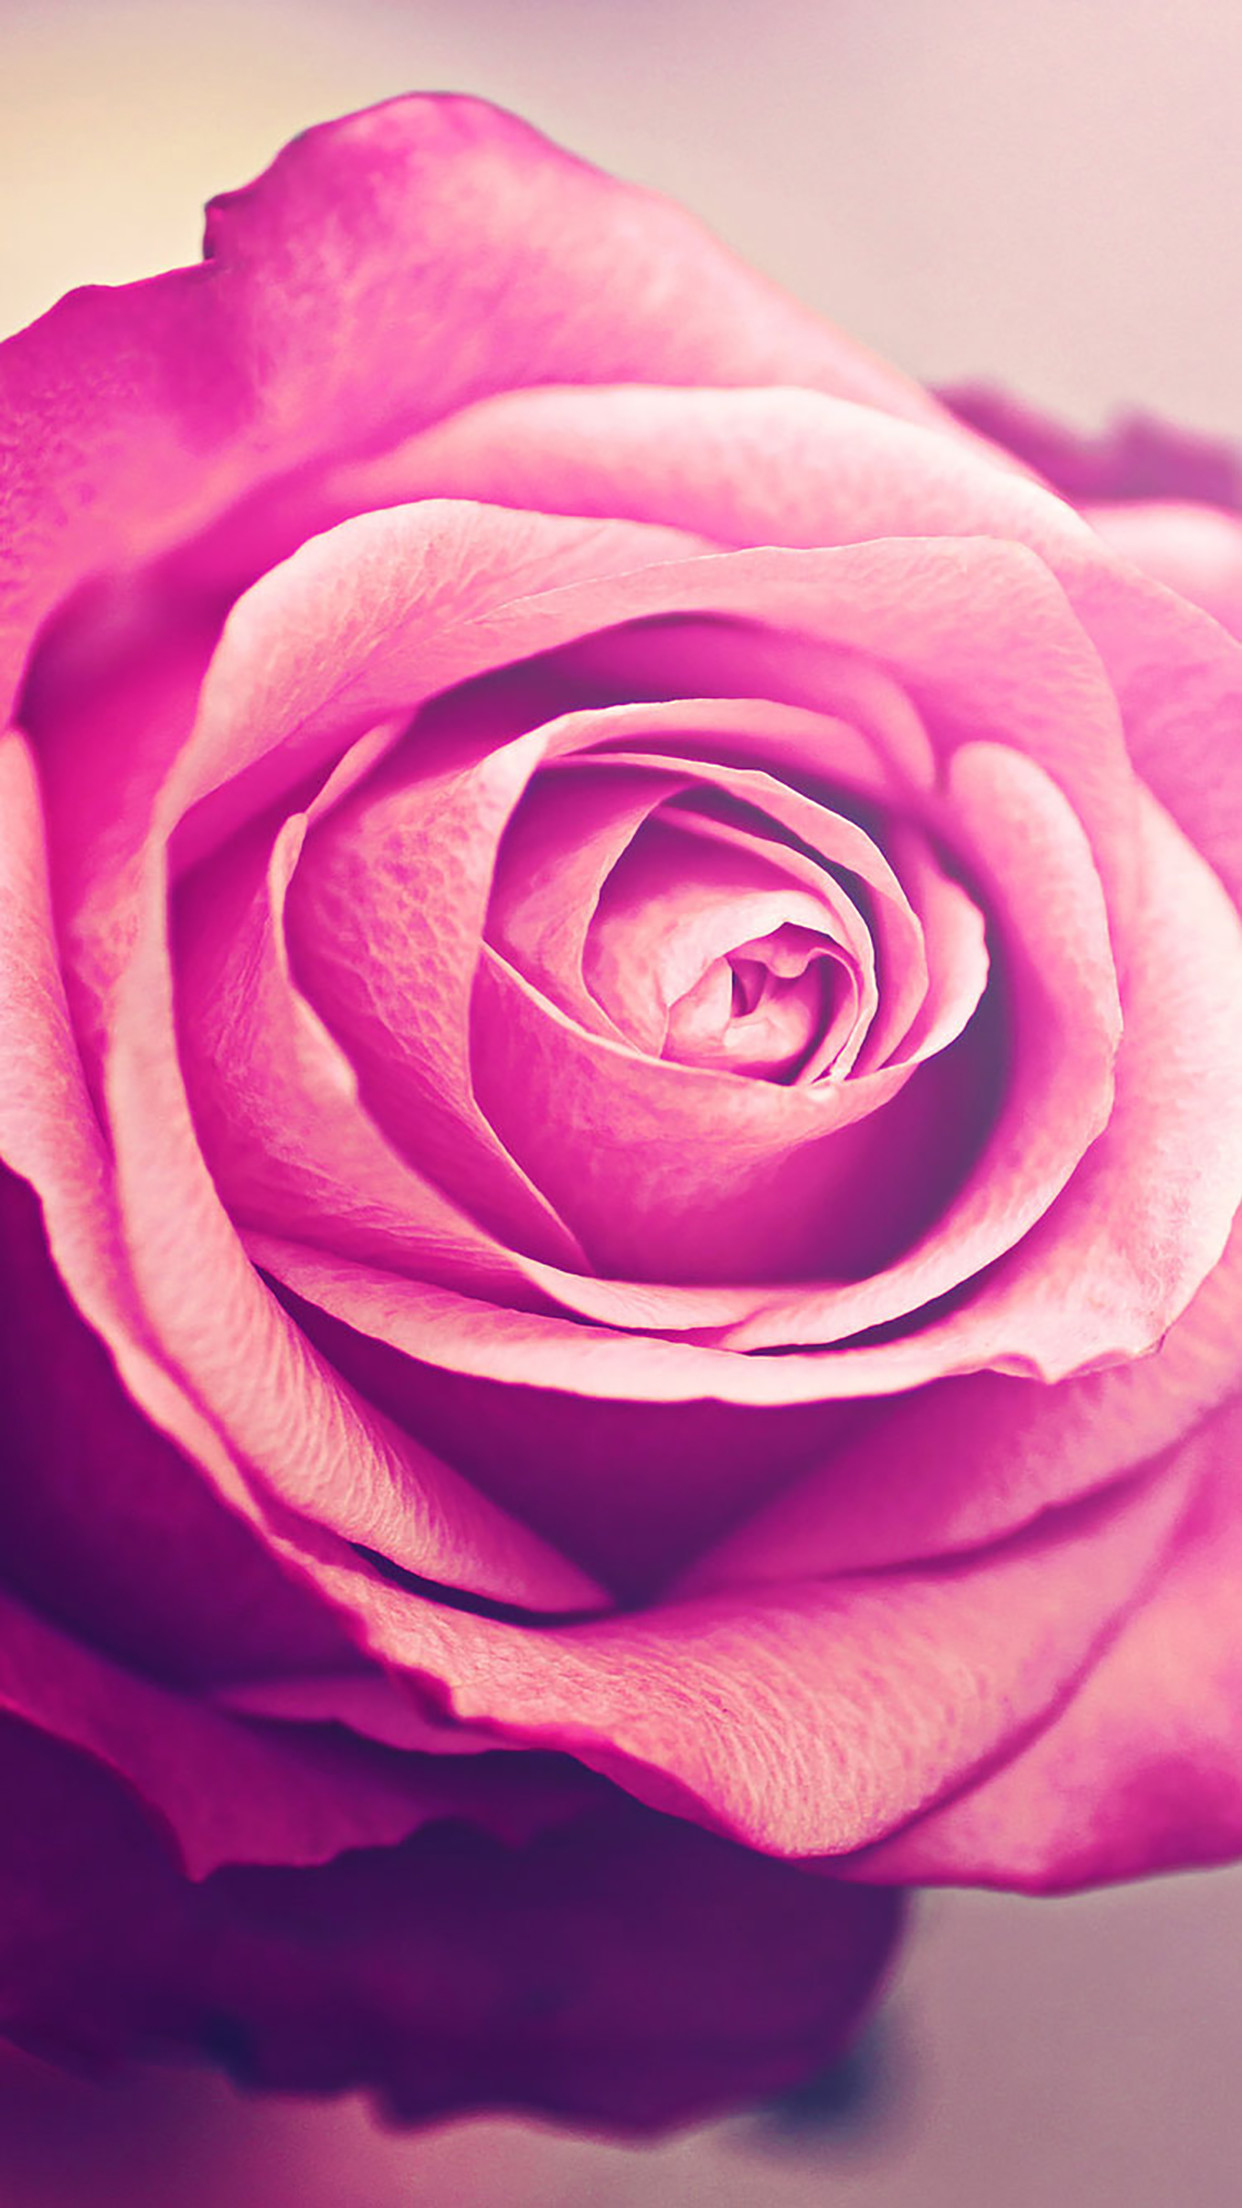 Roses pink romantic rose 3Wallpapers iPhone Parallax